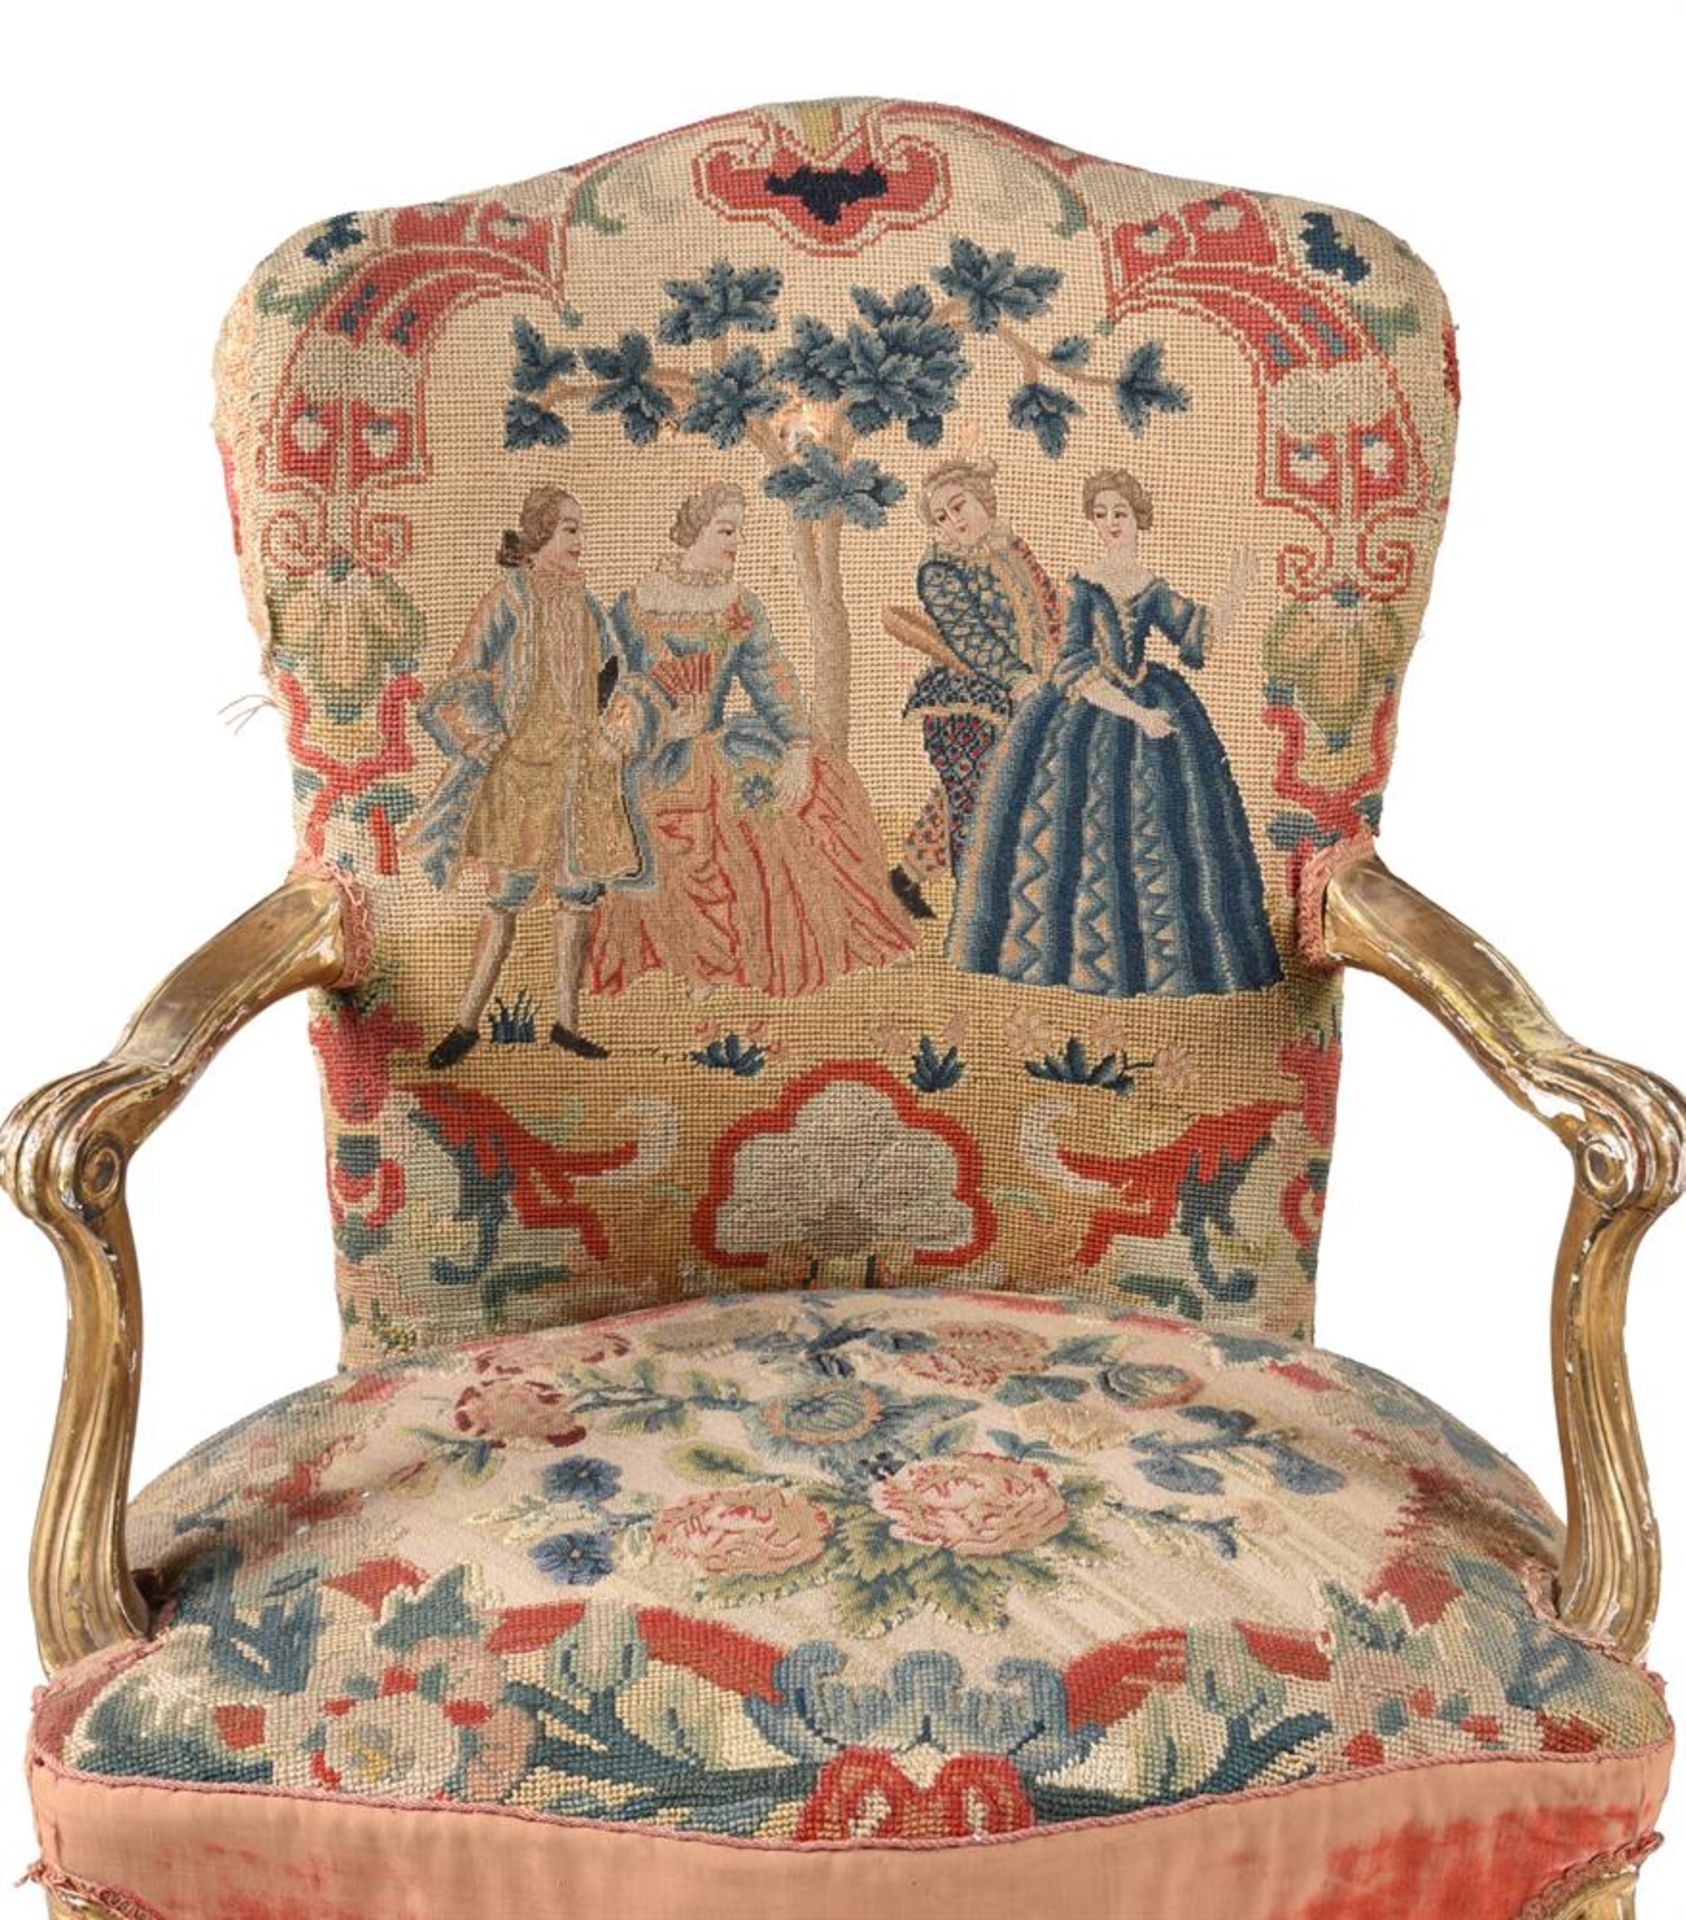 A PAIR OF GEORGE III GILTWOOD AND NEEDLEWORK UPHOLSTERED ARMCHAIRS, CIRCA 1775 - Image 4 of 5